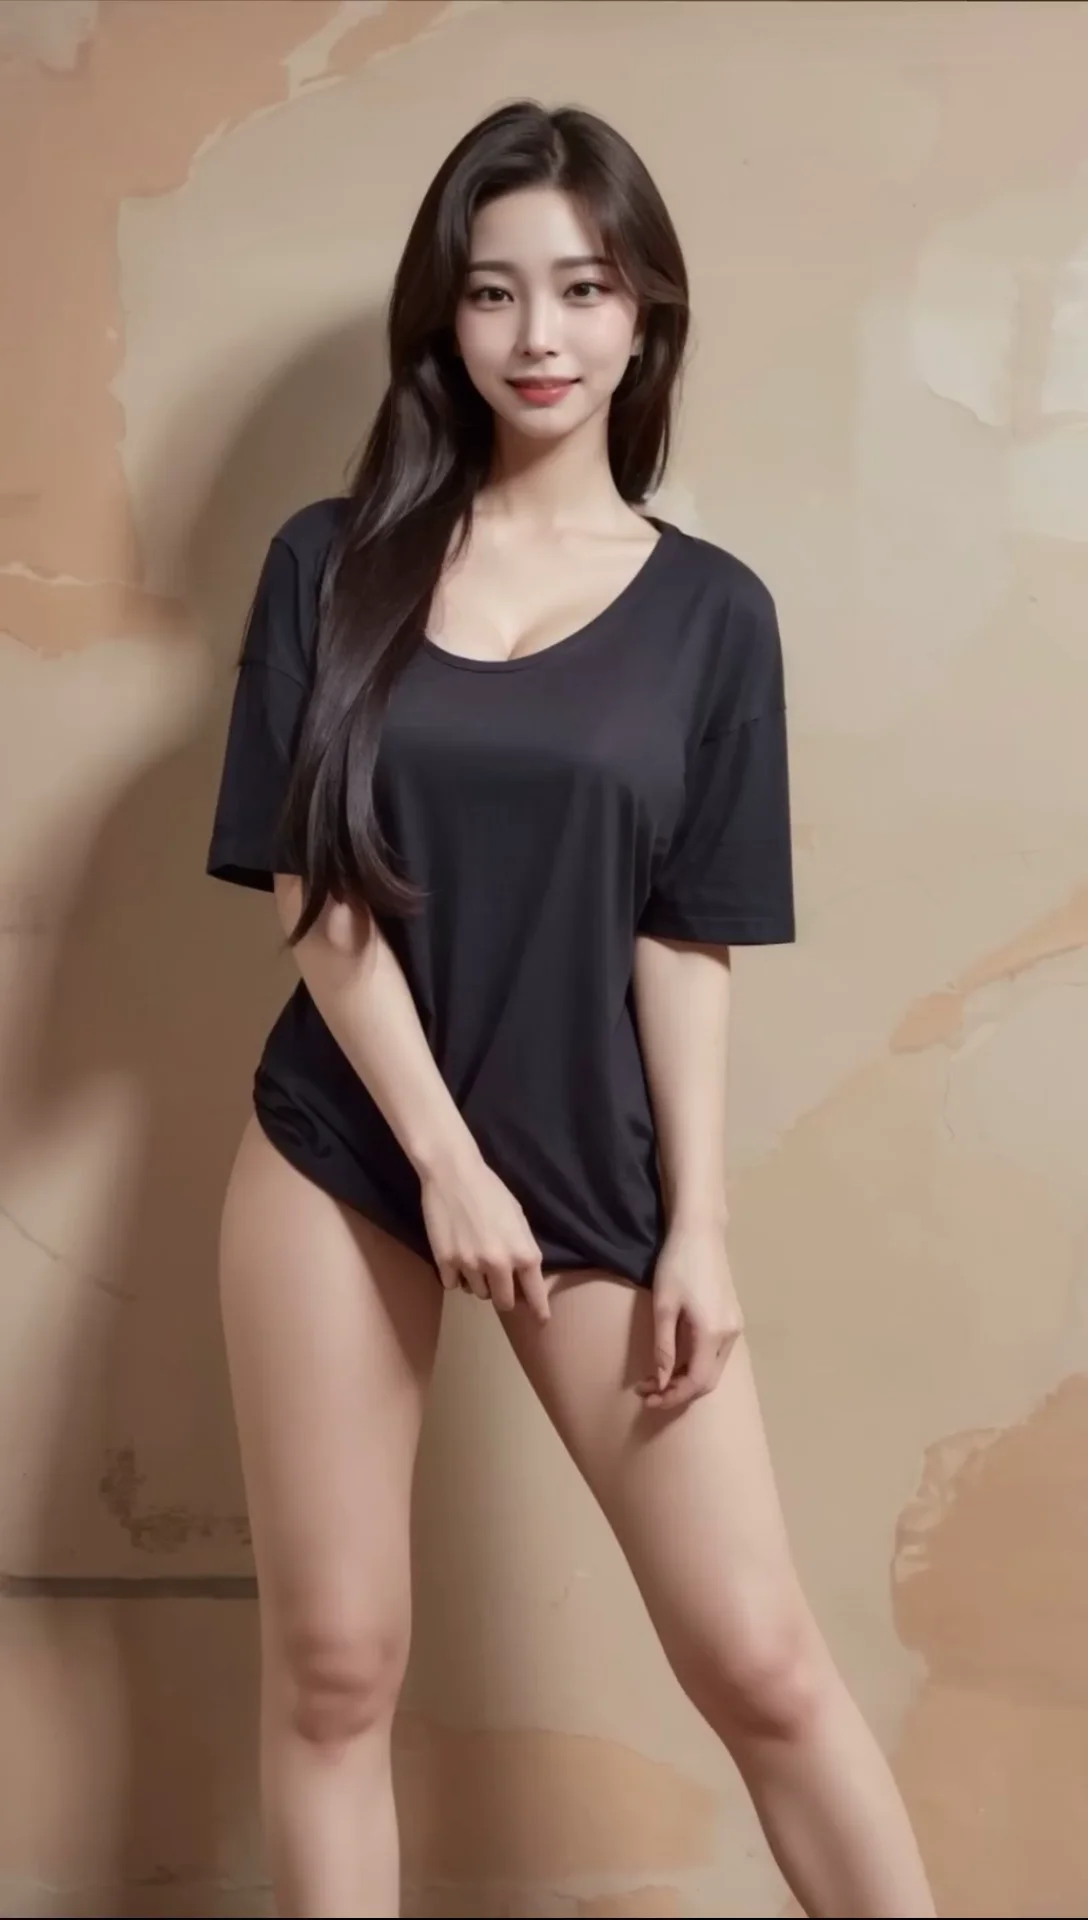 Hot Girl in T-shirt Without Bra - Ai Art Lookbook Images 07